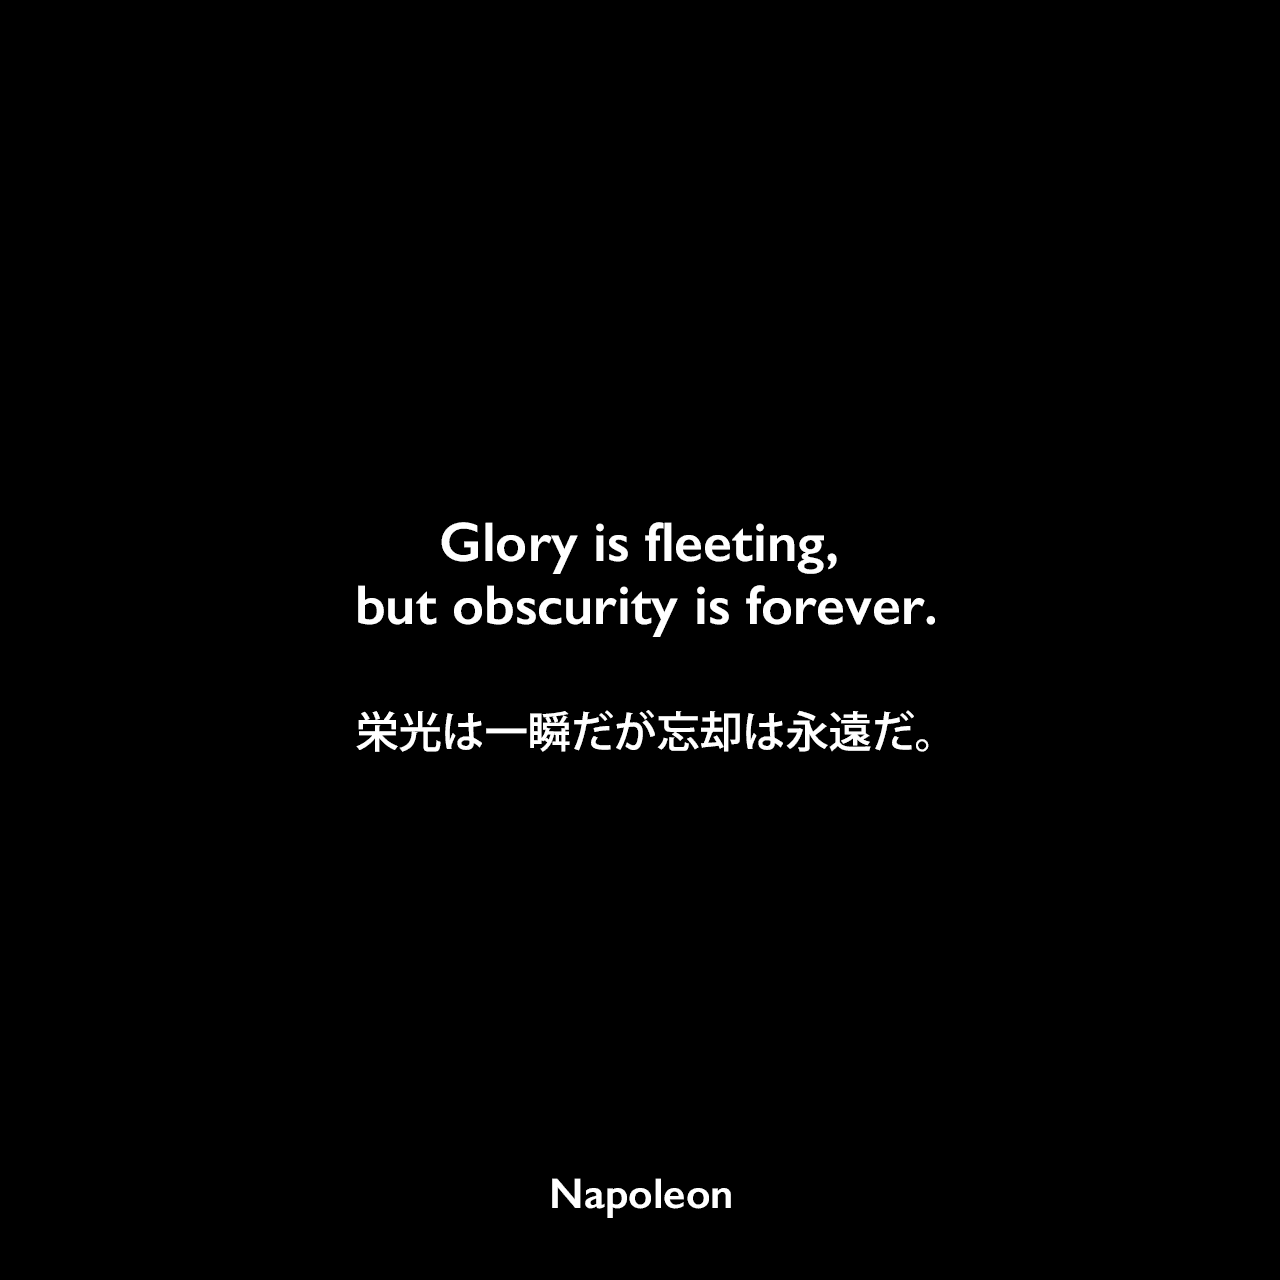 Glory is fleeting, but obscurity is forever.栄光は一瞬だが忘却は永遠だ。Napoleon